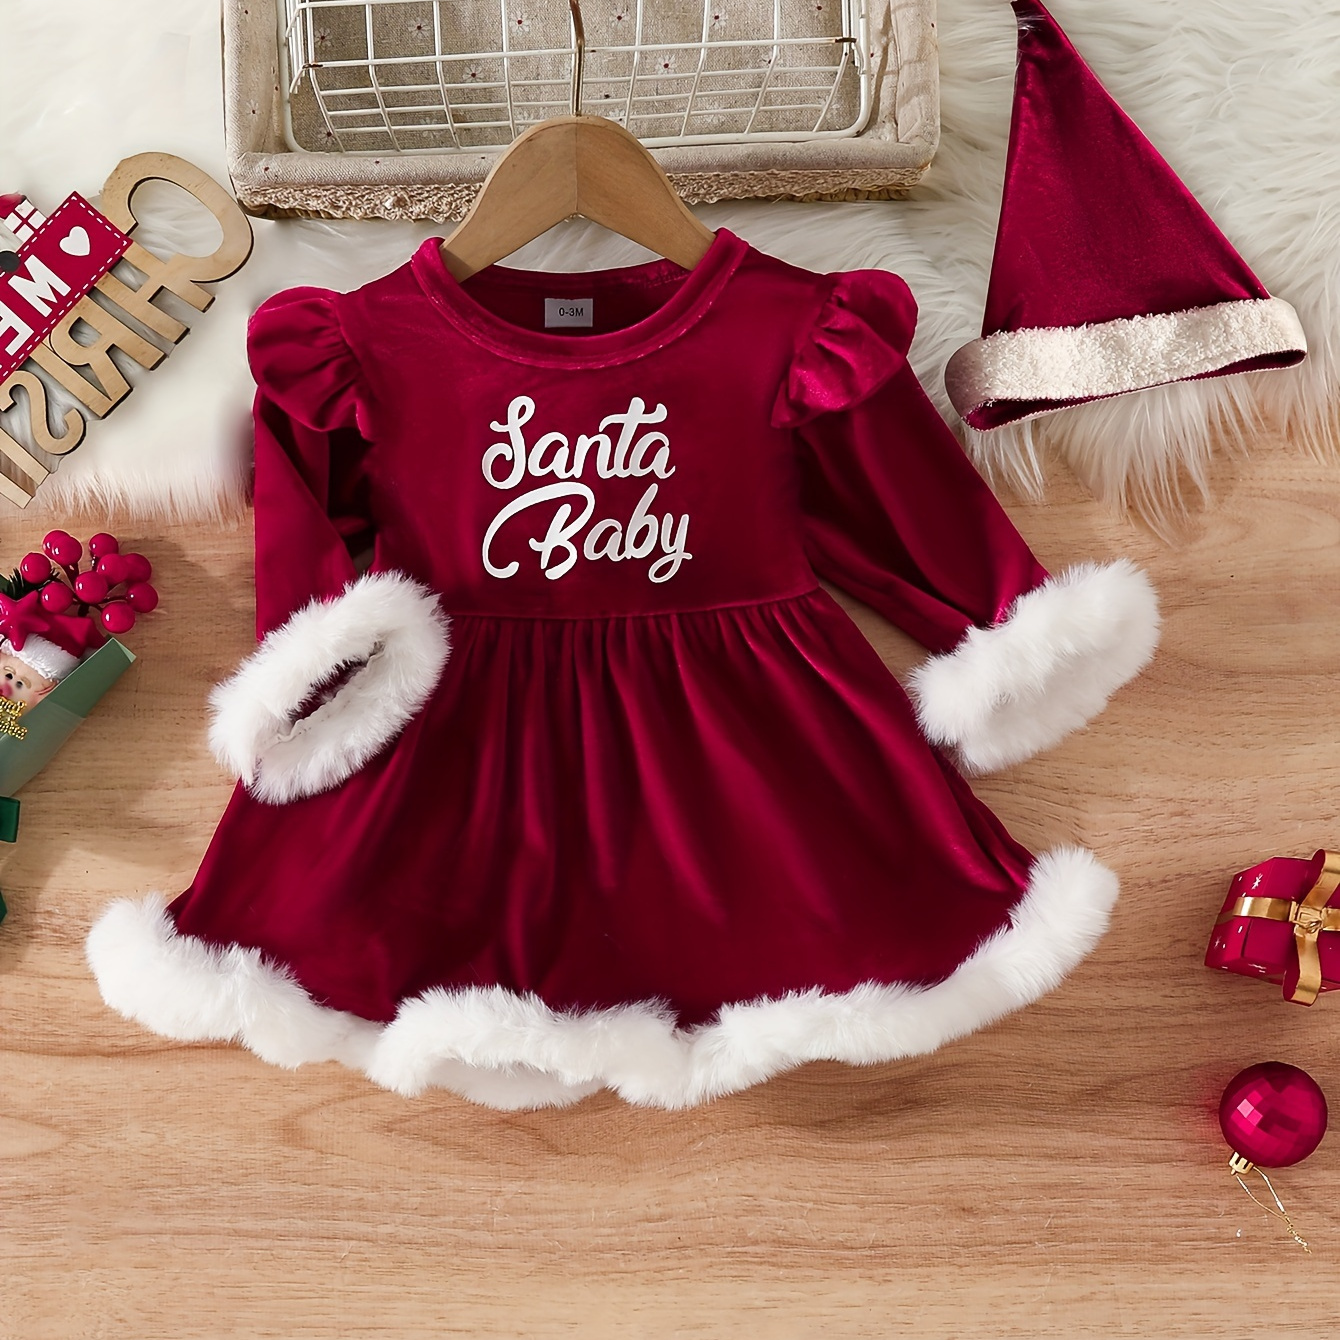 

Baby's Christmas Style Fuzzy Trim Warm Long Sleeve Dress & Hat, Infant & Toddler Girl's Dress For Daily Wear/holiday/party, As Gift